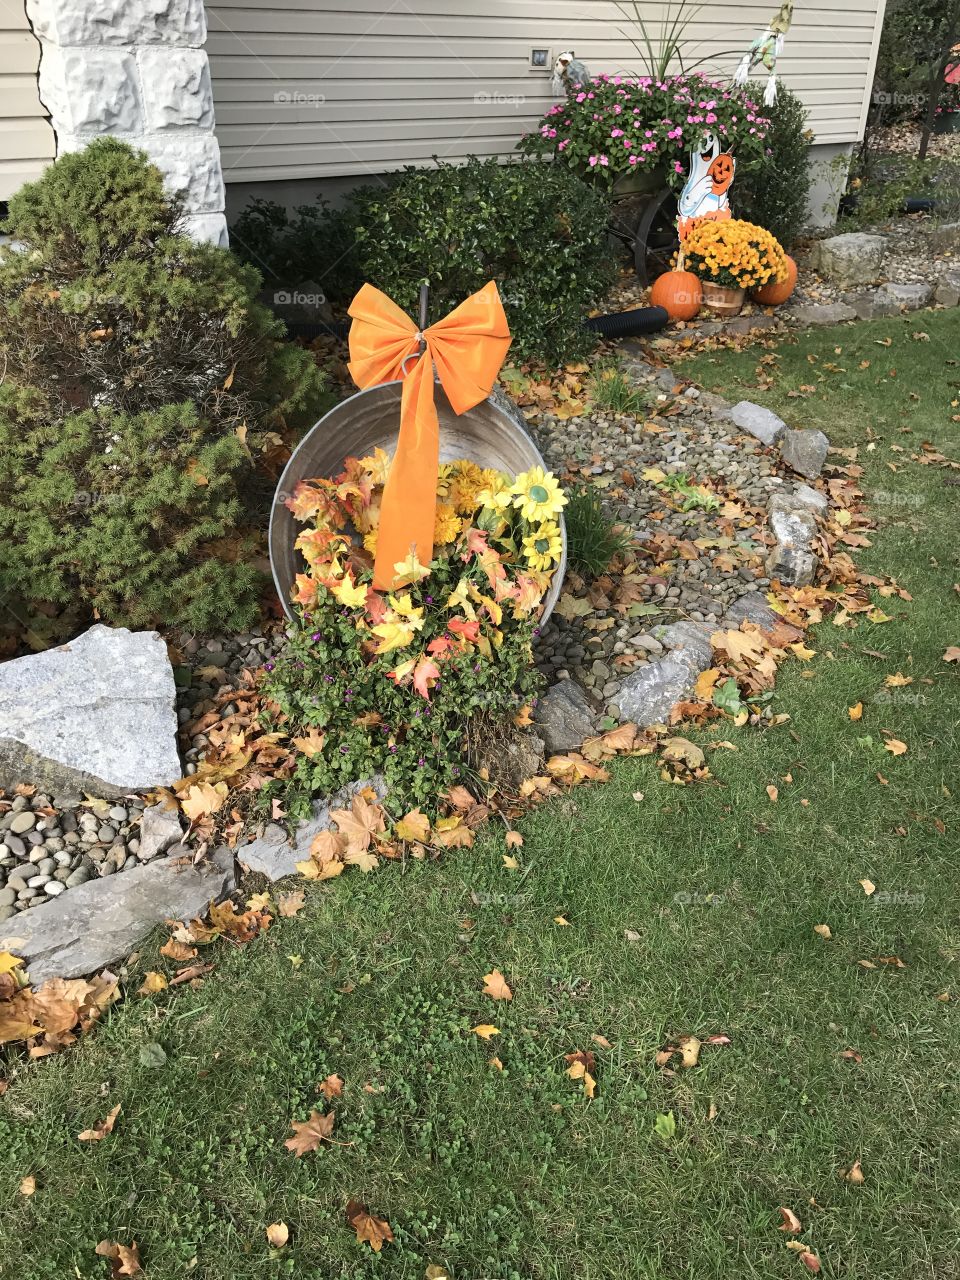 Decorations for fall